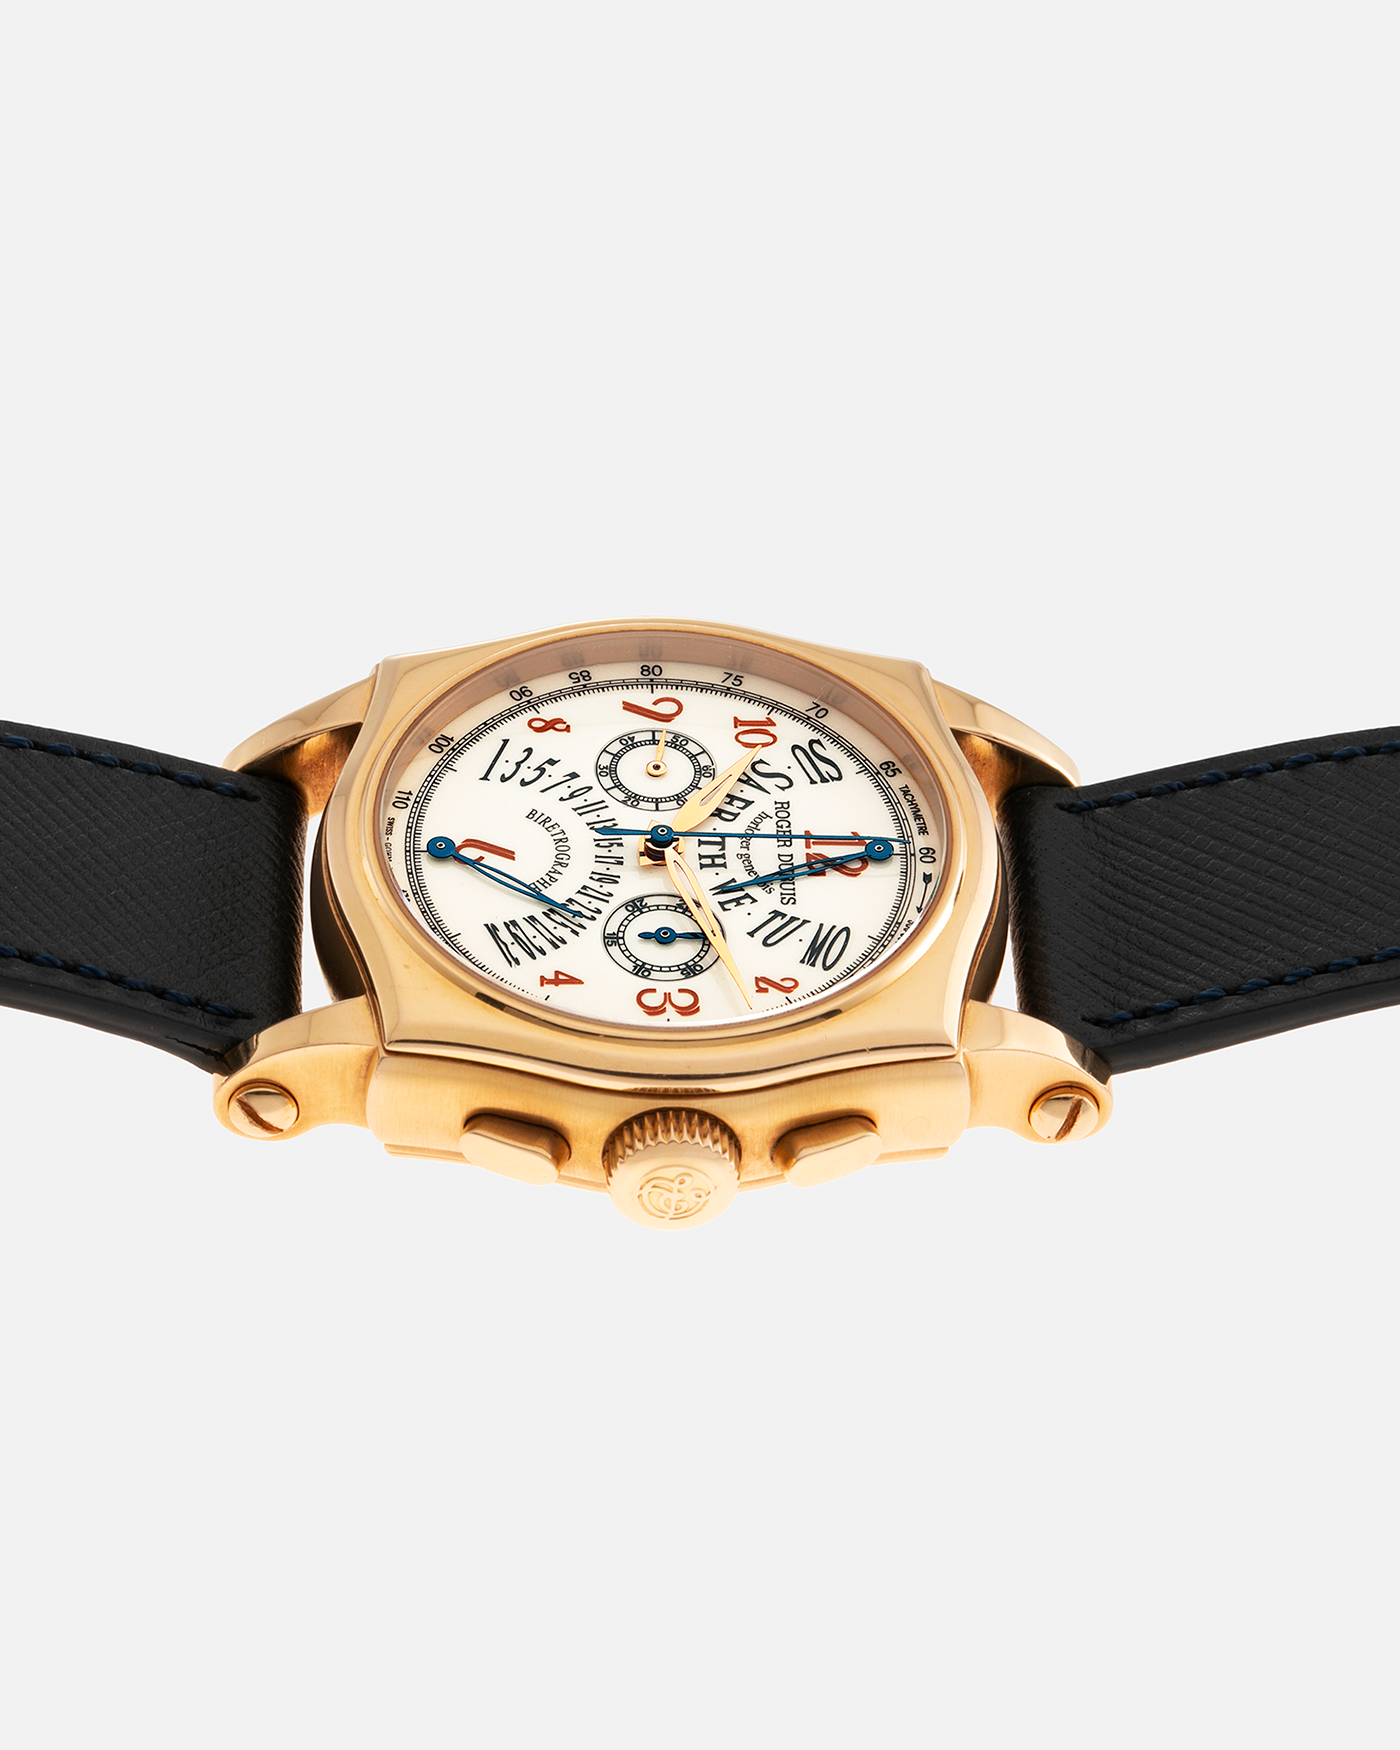 Brand: Roger Dubuis Year: 2000’s Model: Sympathie 40 Biretrograde Chronograph Material: 18-carat Yellow Gold Movement: Roger Dubuis Cal. RD 5630 (Based on the Lemania Cal. 2310), Manual-Winding Case Diameter: 40mm Strap: Molequin Navy Blue Textured Calf Leather Strap with Signed 18-carat Yellow Gold Roger Dubuis Tang Buckle